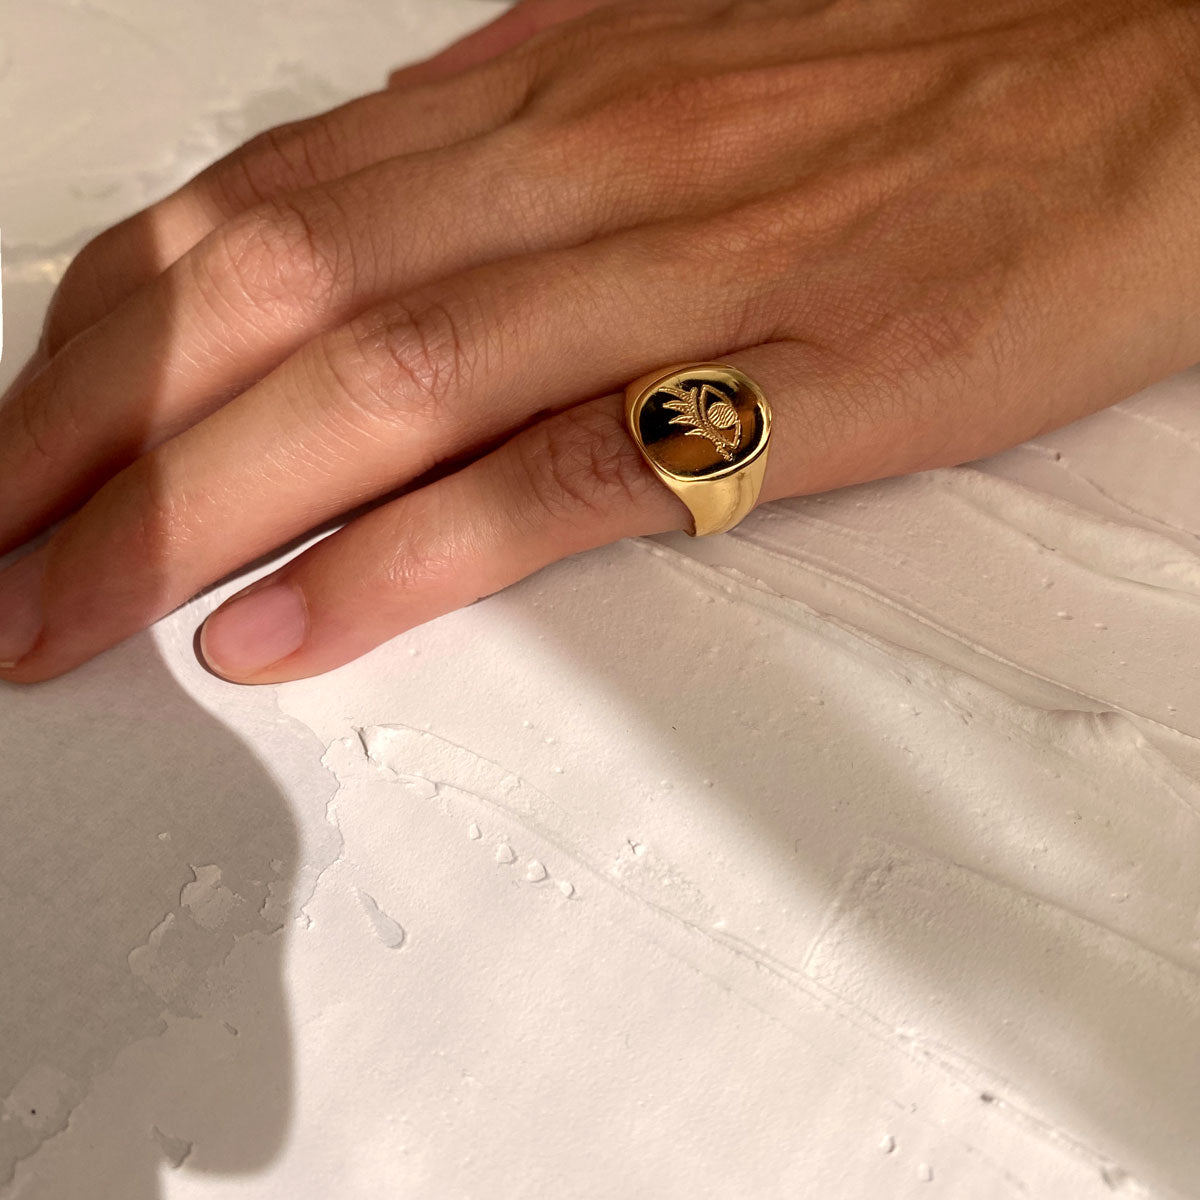 gold signet ring eye engraved ana buendia colombian jewelry